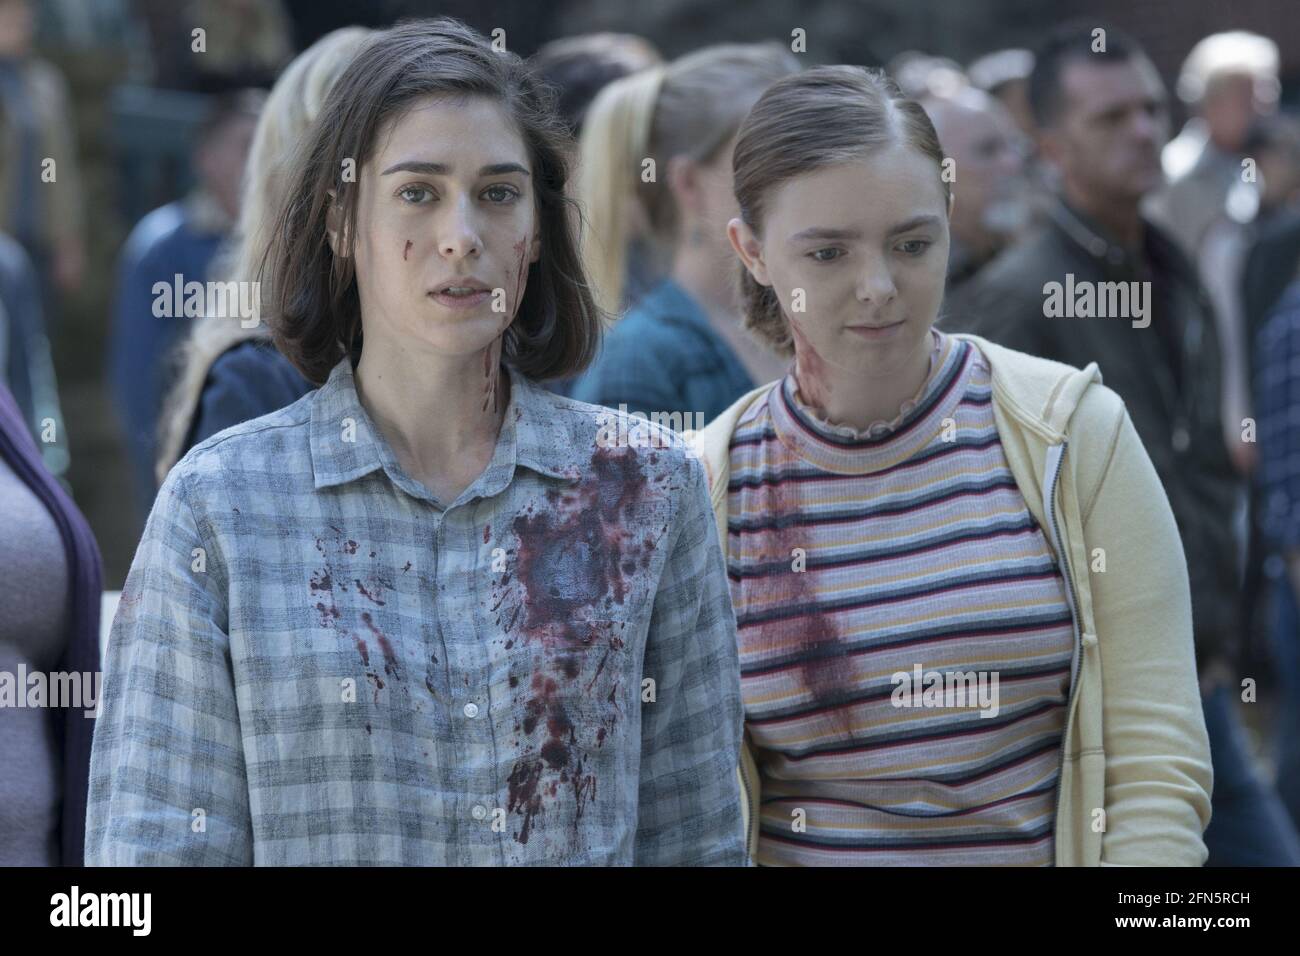 Castle Rock (TV series), starring starring Lizzy Caplan as Annie Wilkes Stock Photo